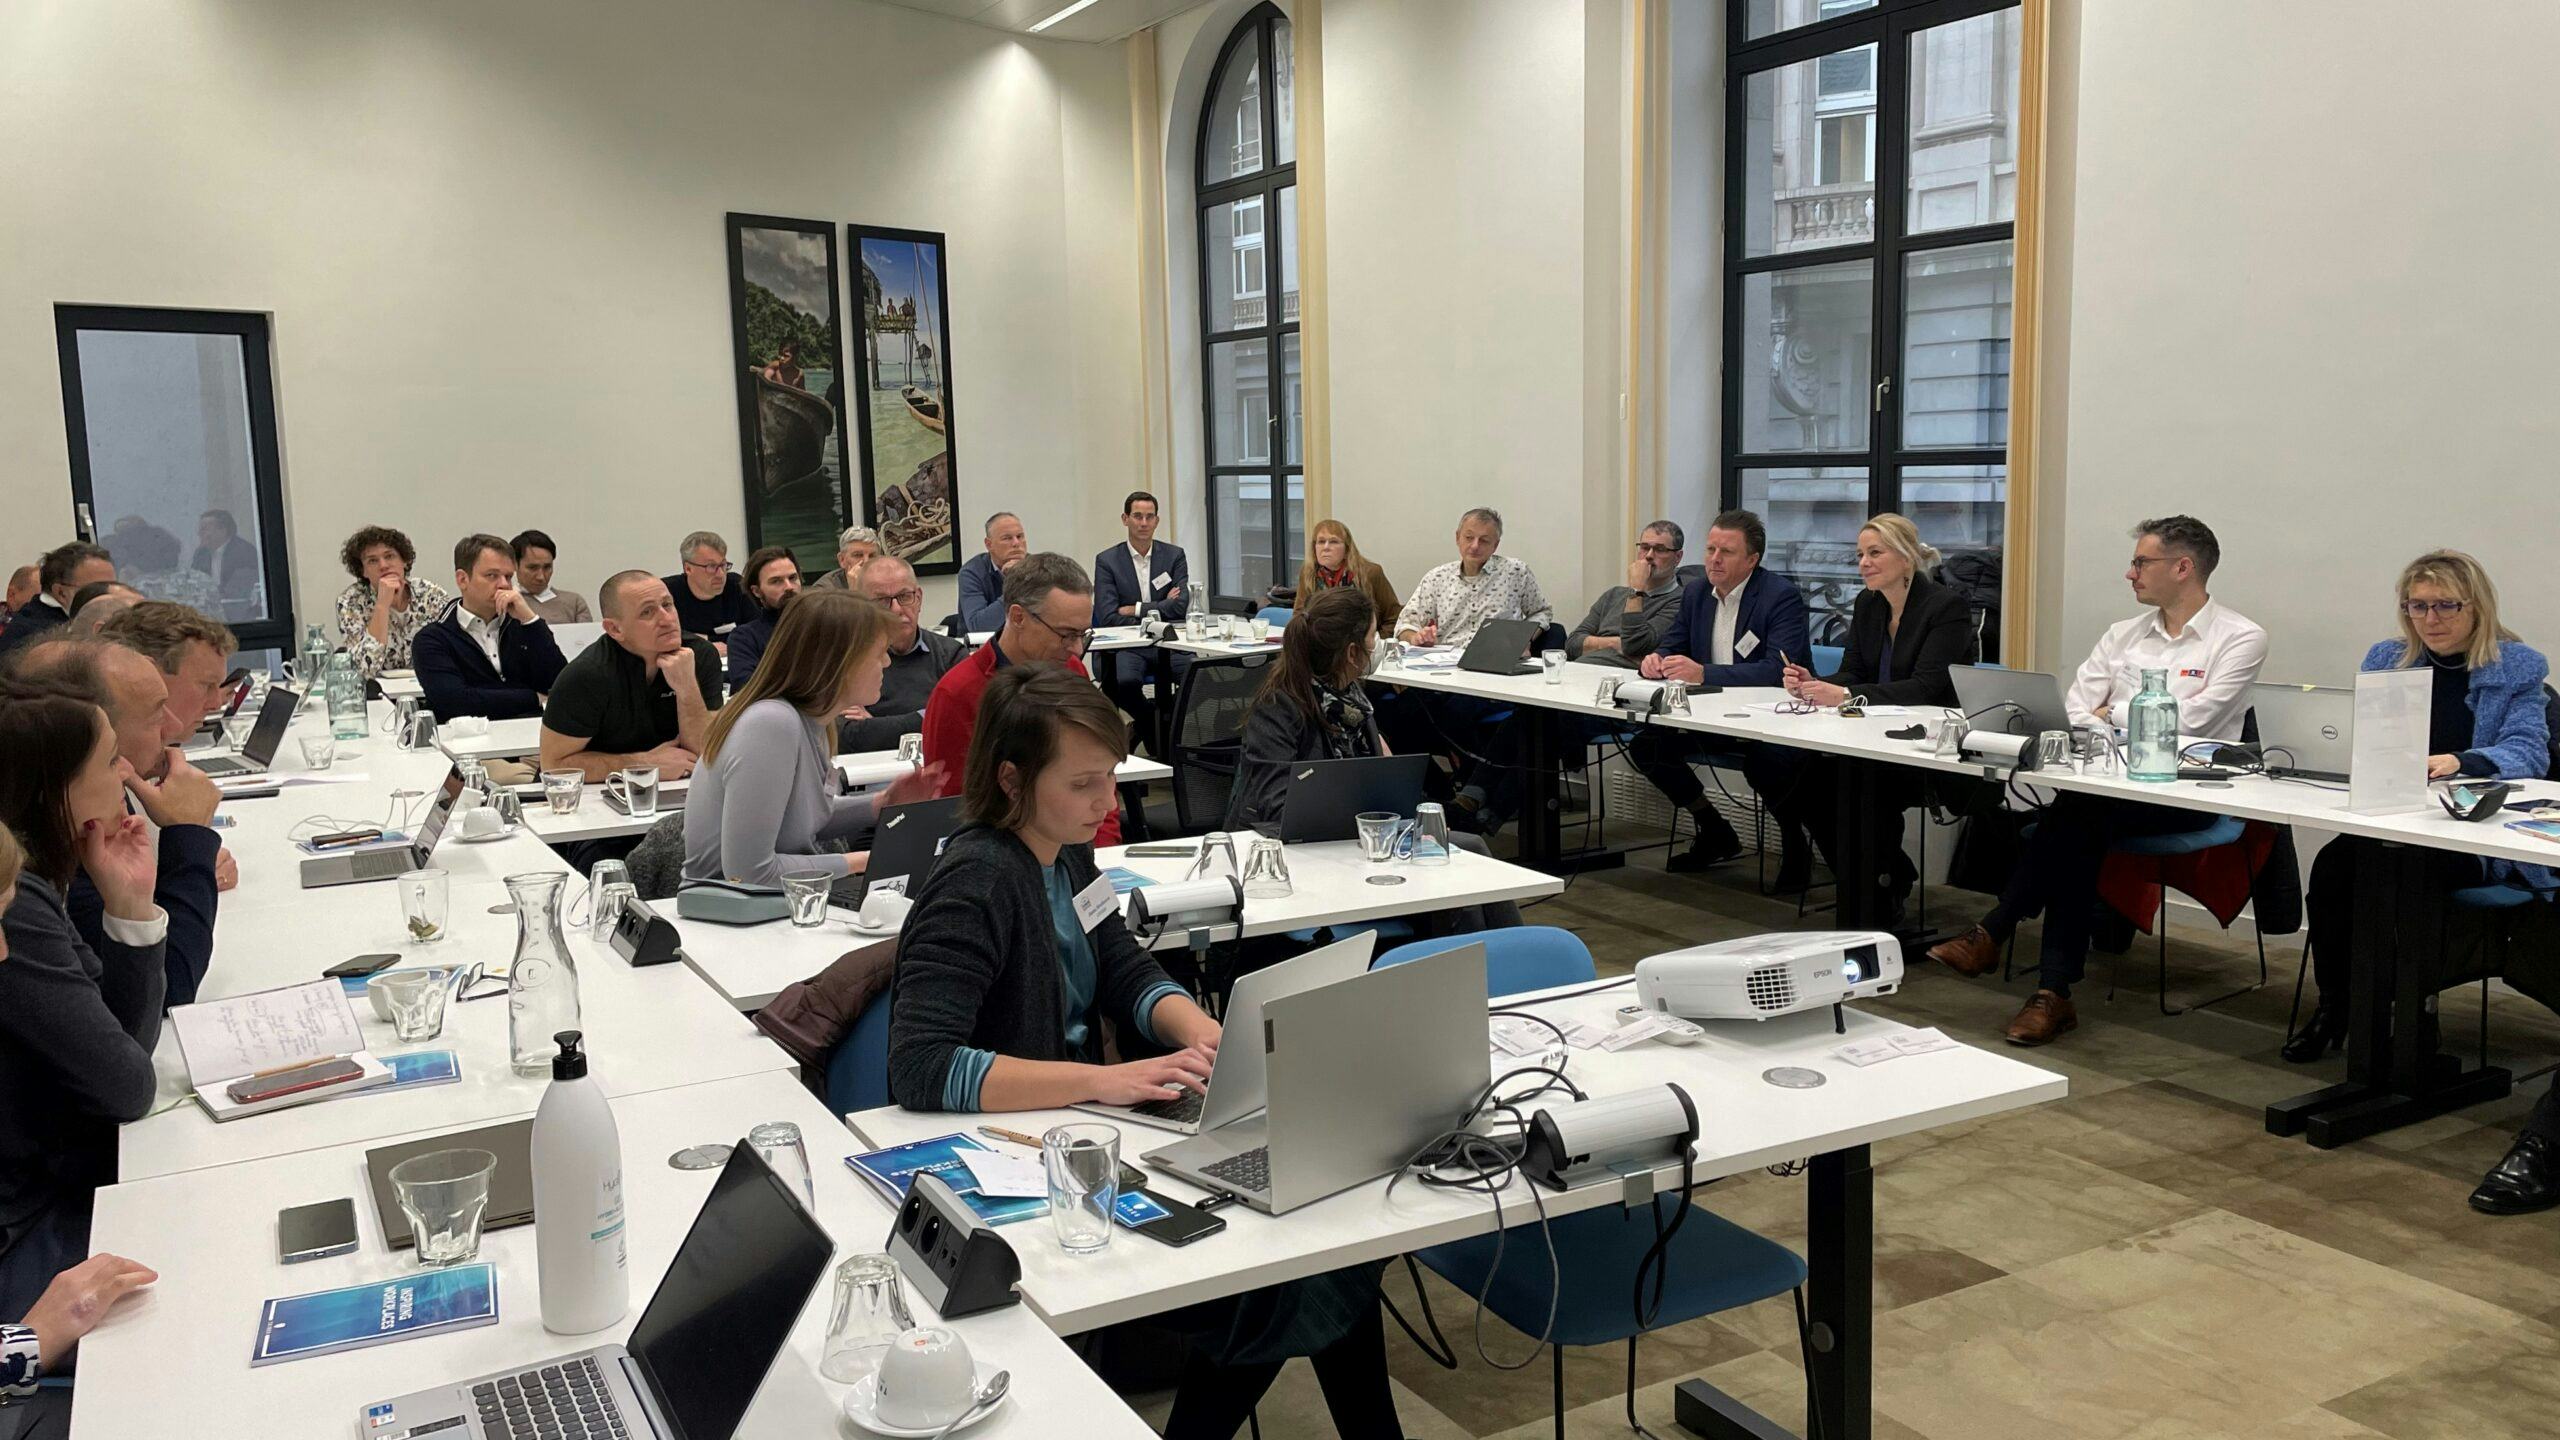 The CONEBI workshop on Intelligent Transport Systems (ITS) and Cooperative, Connected and Automated Mobility (CCAM). – Photo CONEBI 